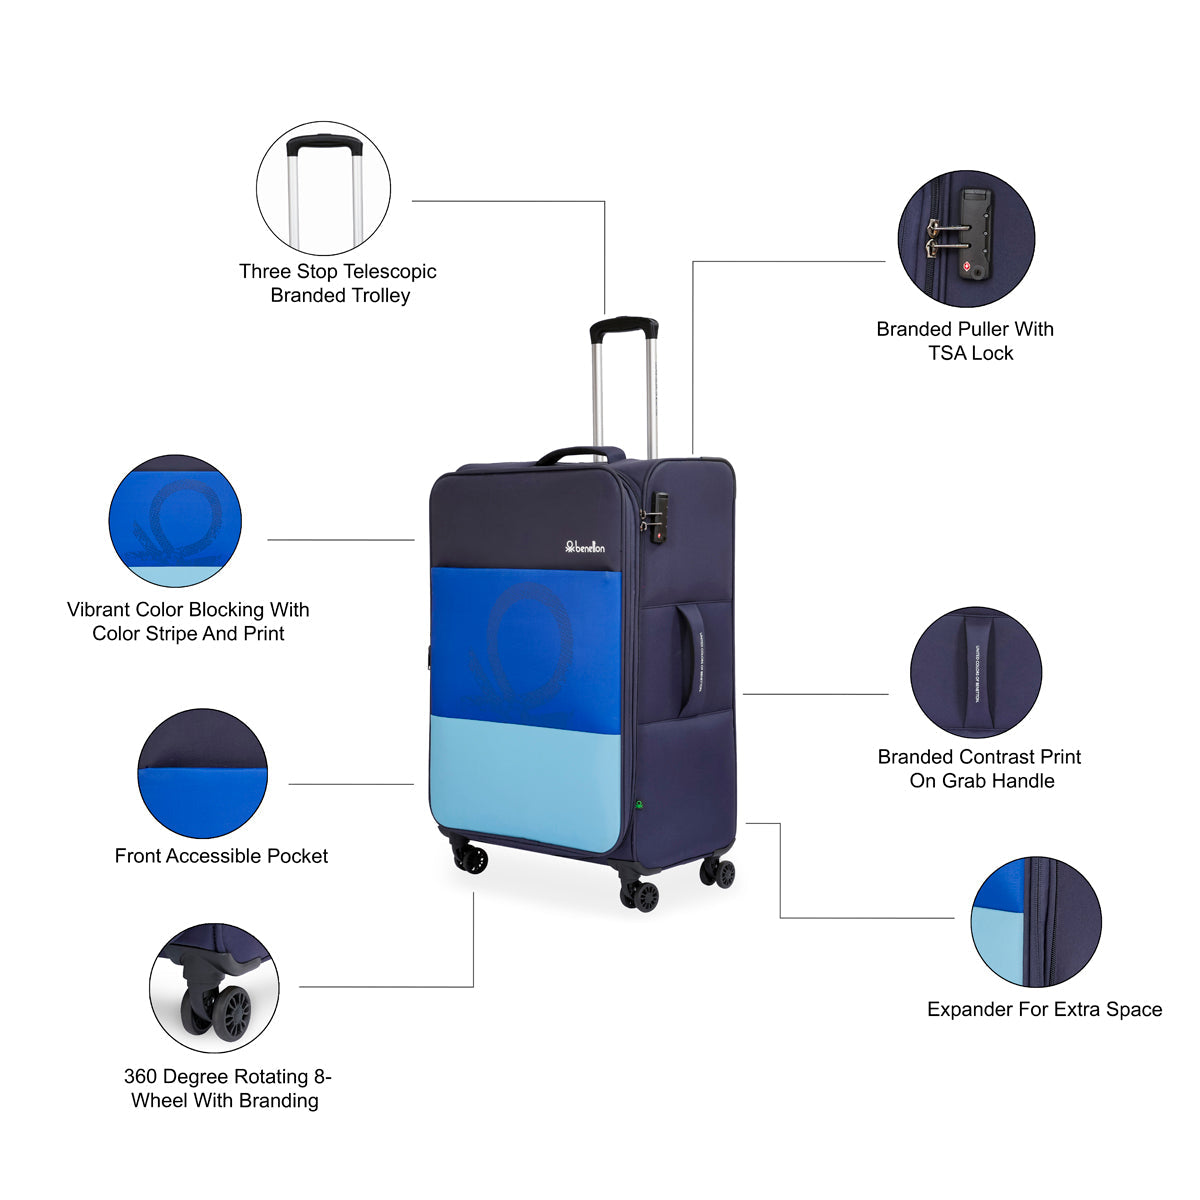 United Colors of Benetton Archimedes Soft Luggage Navy Cargo